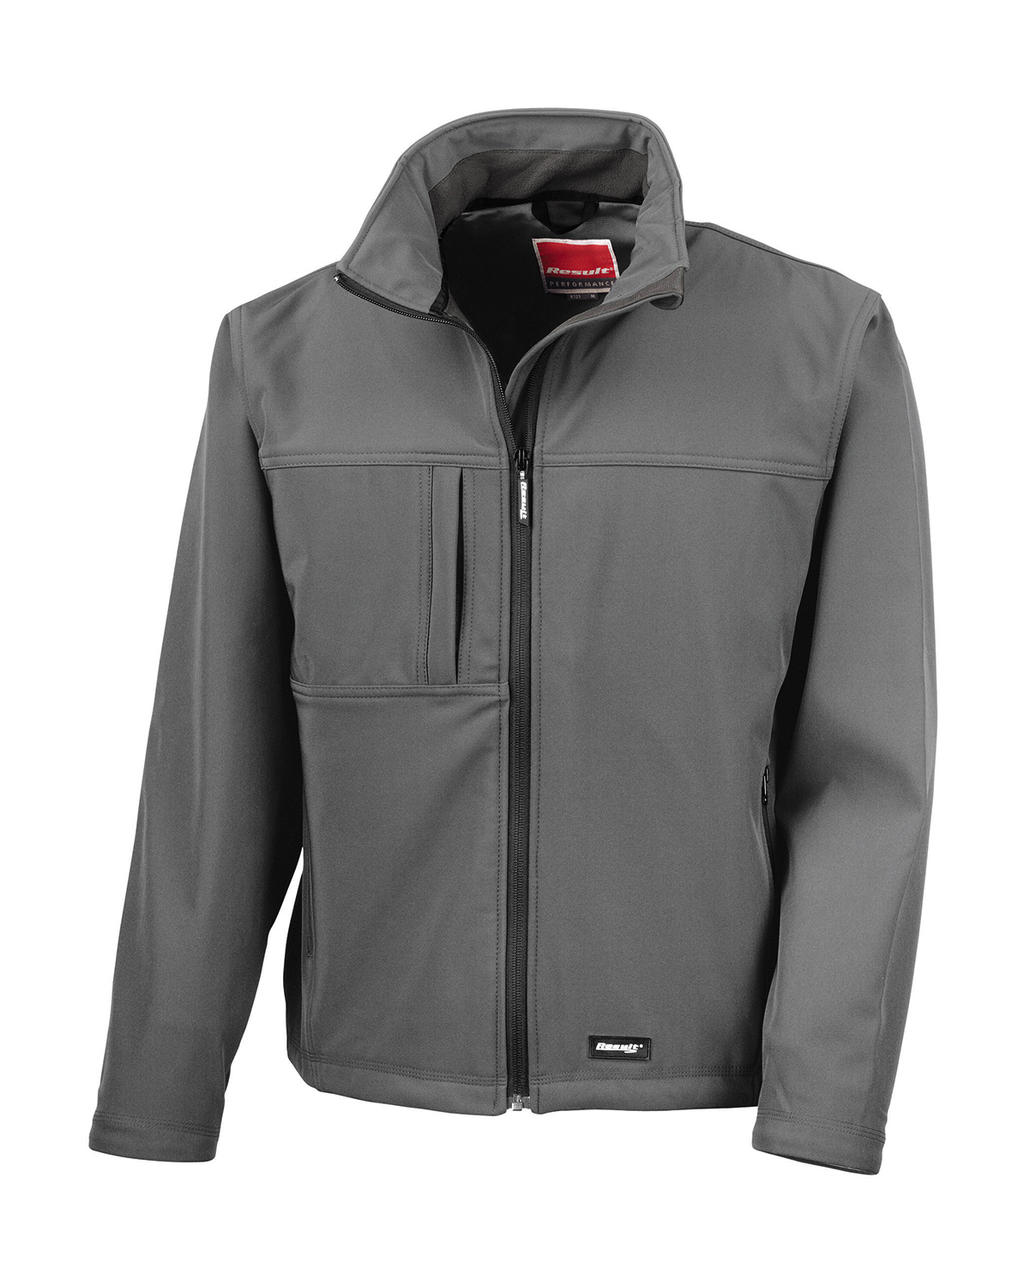  Mens Classic Softshell Jacket in Farbe Grey